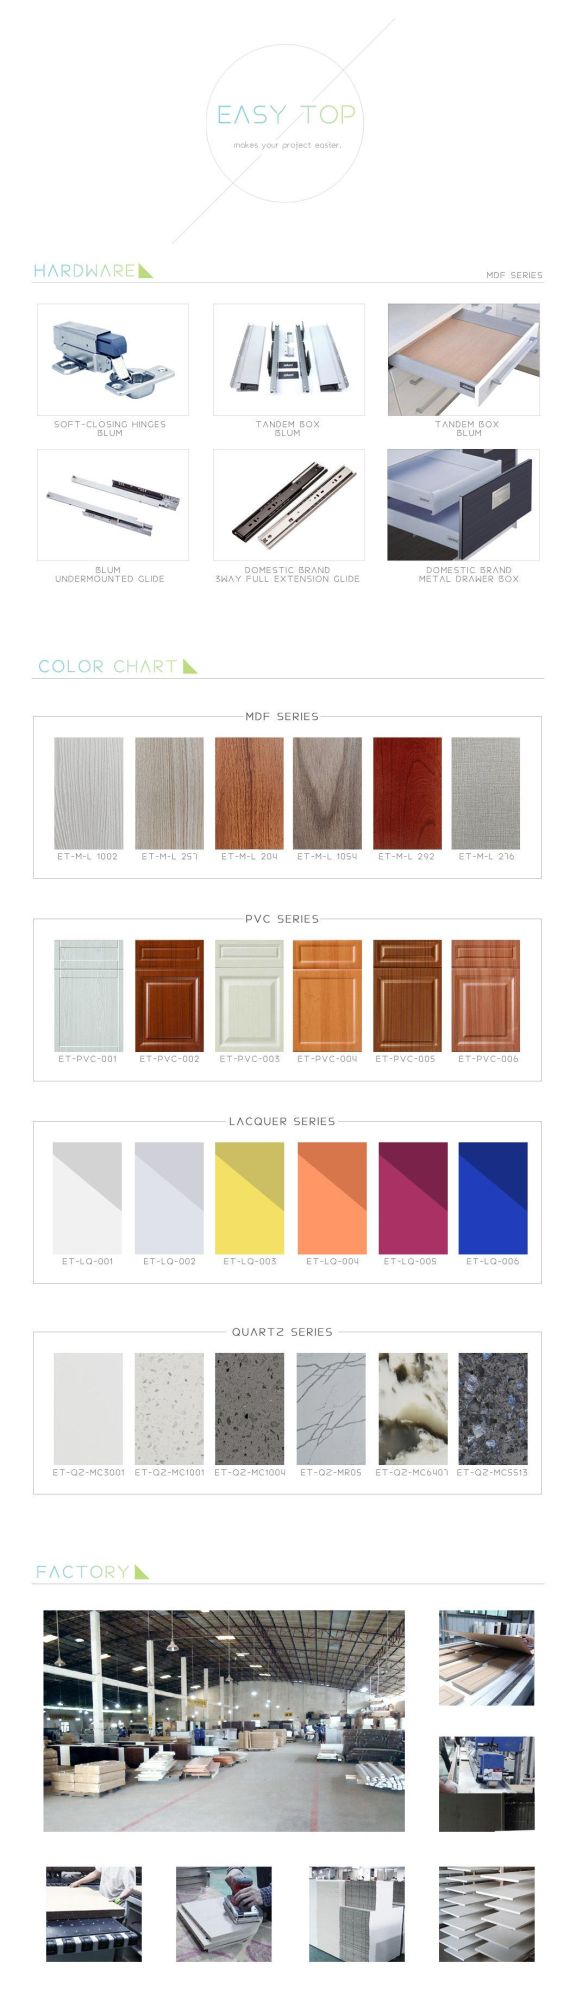 High Quality Hot Sale Best Quality Floor Mounted Bathroom Mirror Cabinet